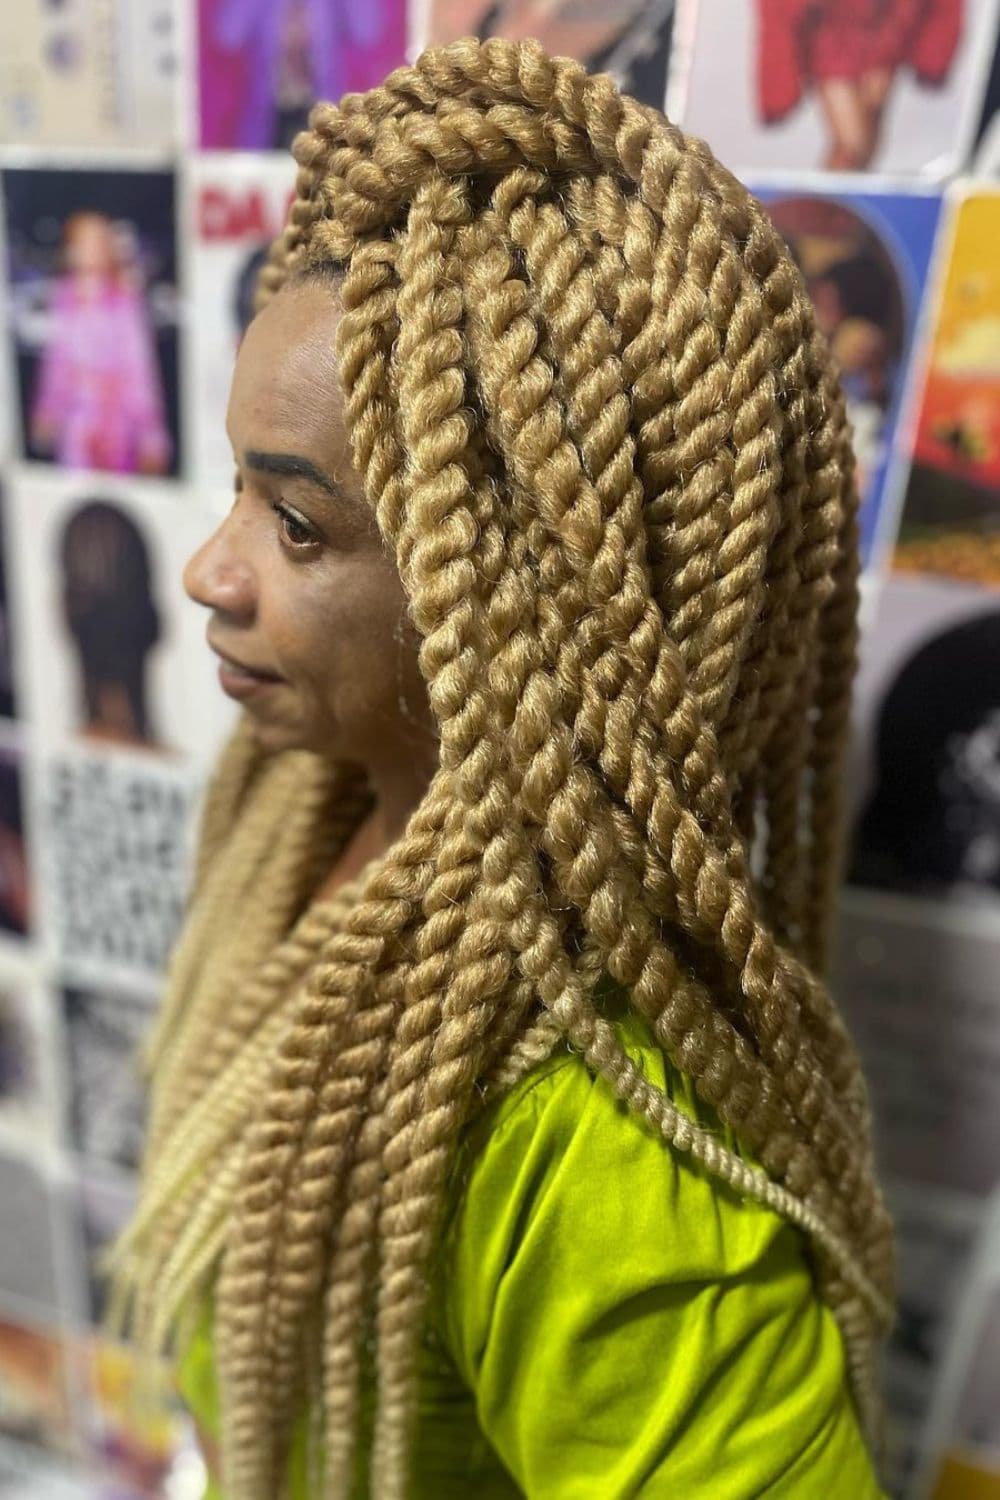 A woman with blonde mambo braids.